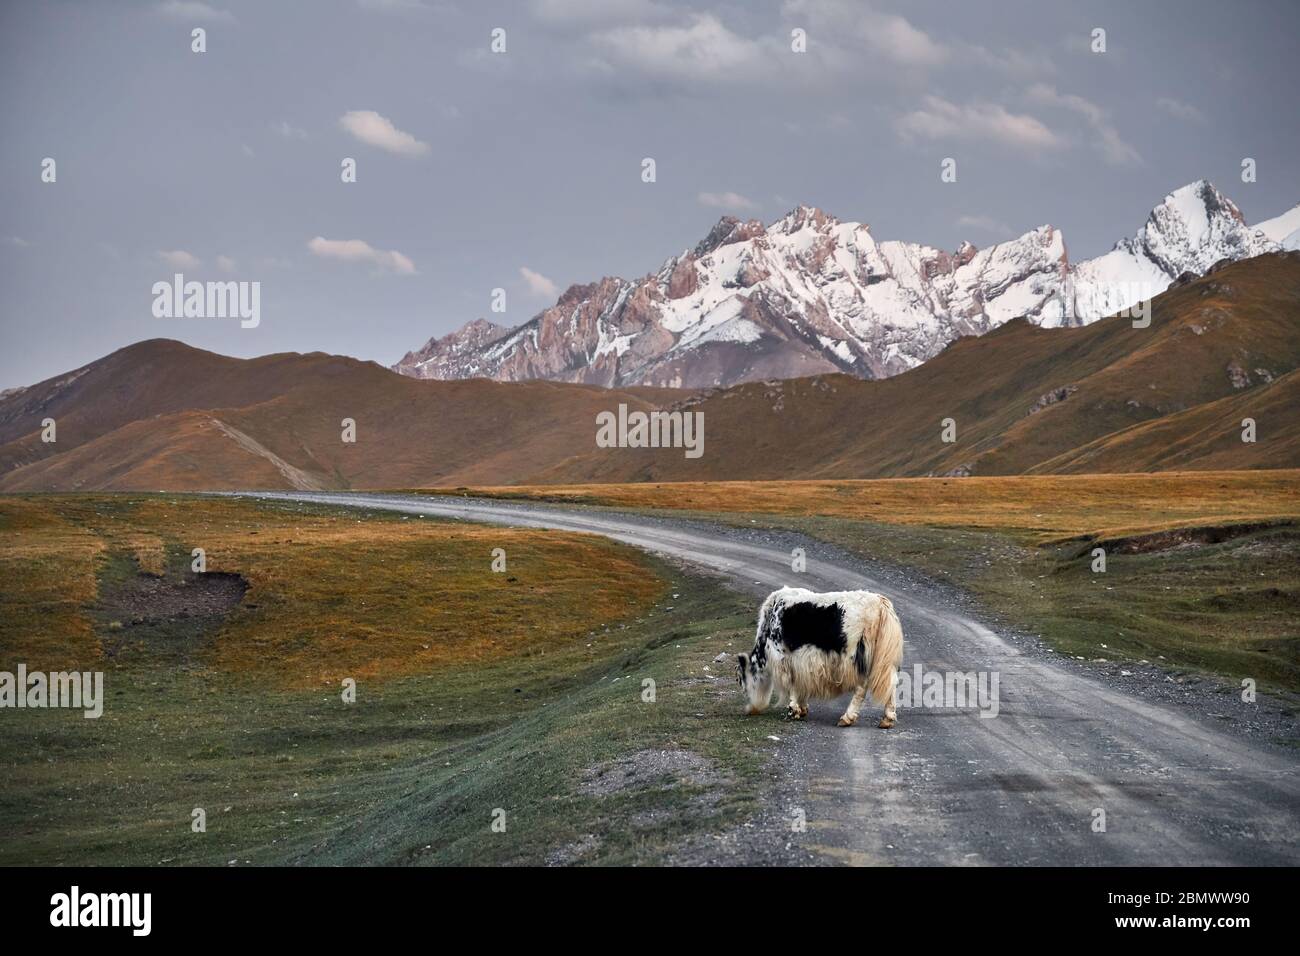 White Yak with crossing the road in the mountain valley of Kyrgyzstan, Central Asia Stock Photo